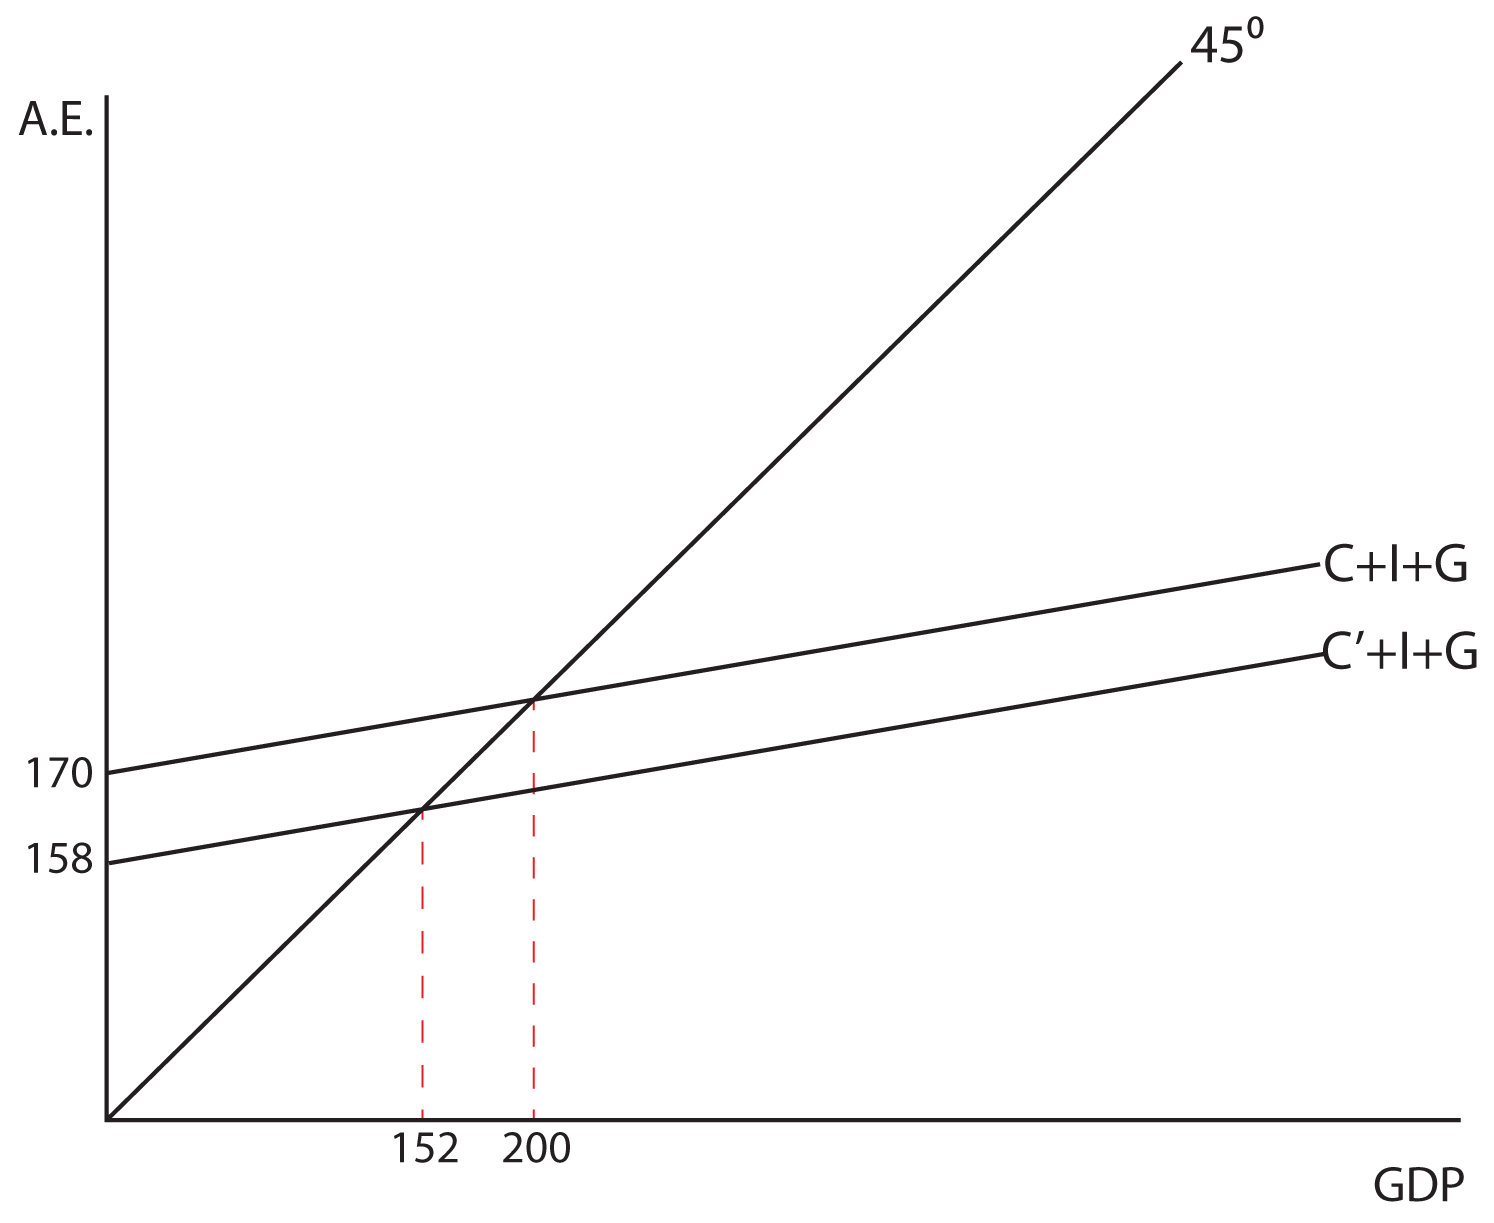 Image 7.11: The image shows a graph. The y axis is labeled A.E. The x axis is labeled GDP. There is a 45 degree line drawn from the origin. There are two lines drawn from the y axis, the first starts at 158 units on the y axis and has a slope of C prime +I+G and it intersects the 45 degree line at 152 units on the x axis, the second starts at 170 units on the y axis and has a slope of C+I+G and it intersects the 45 degree line at 200 units on the x axis.